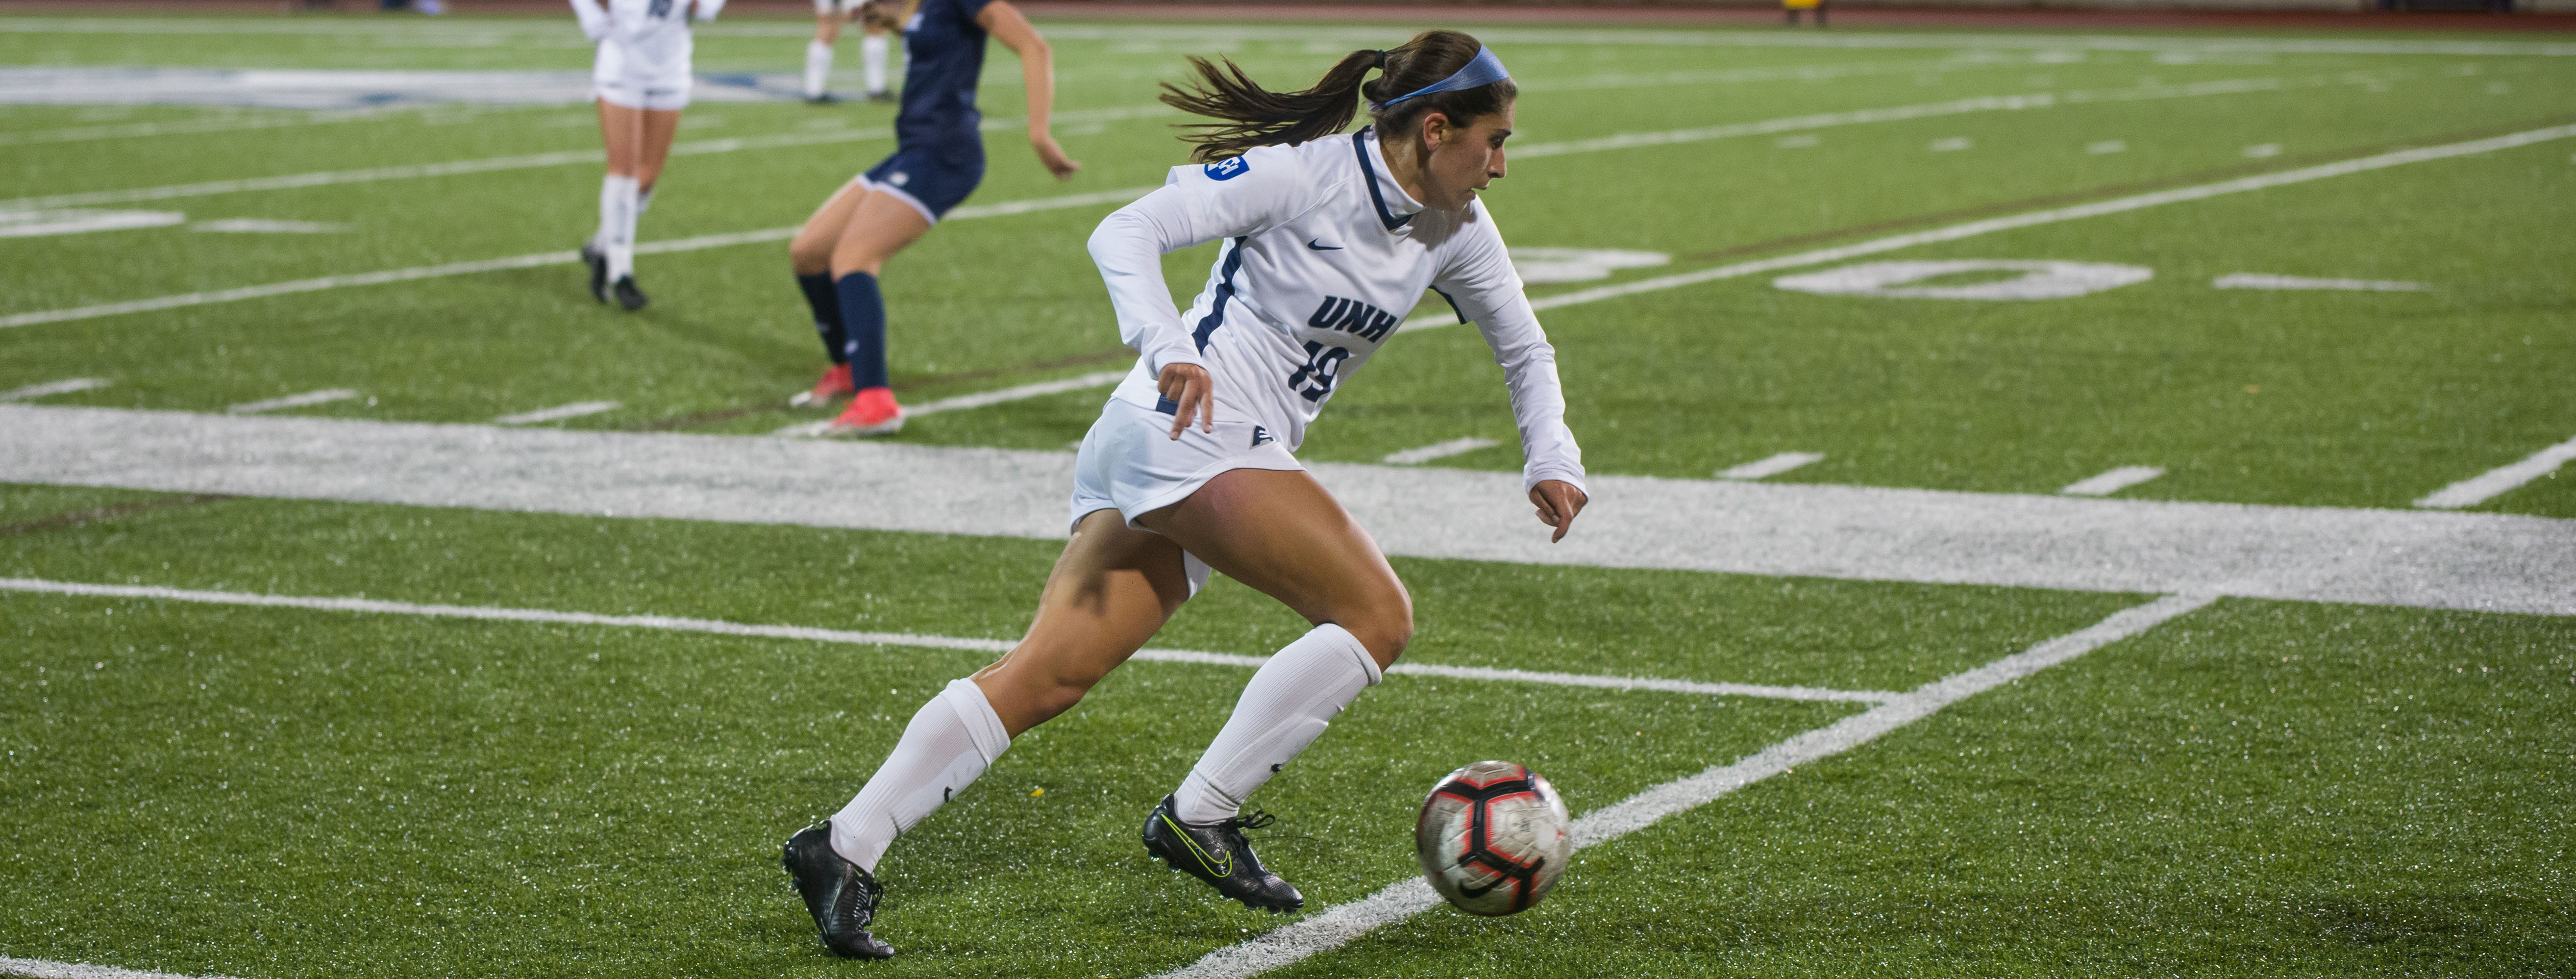 UNH women's soccer player moving the ball upfield